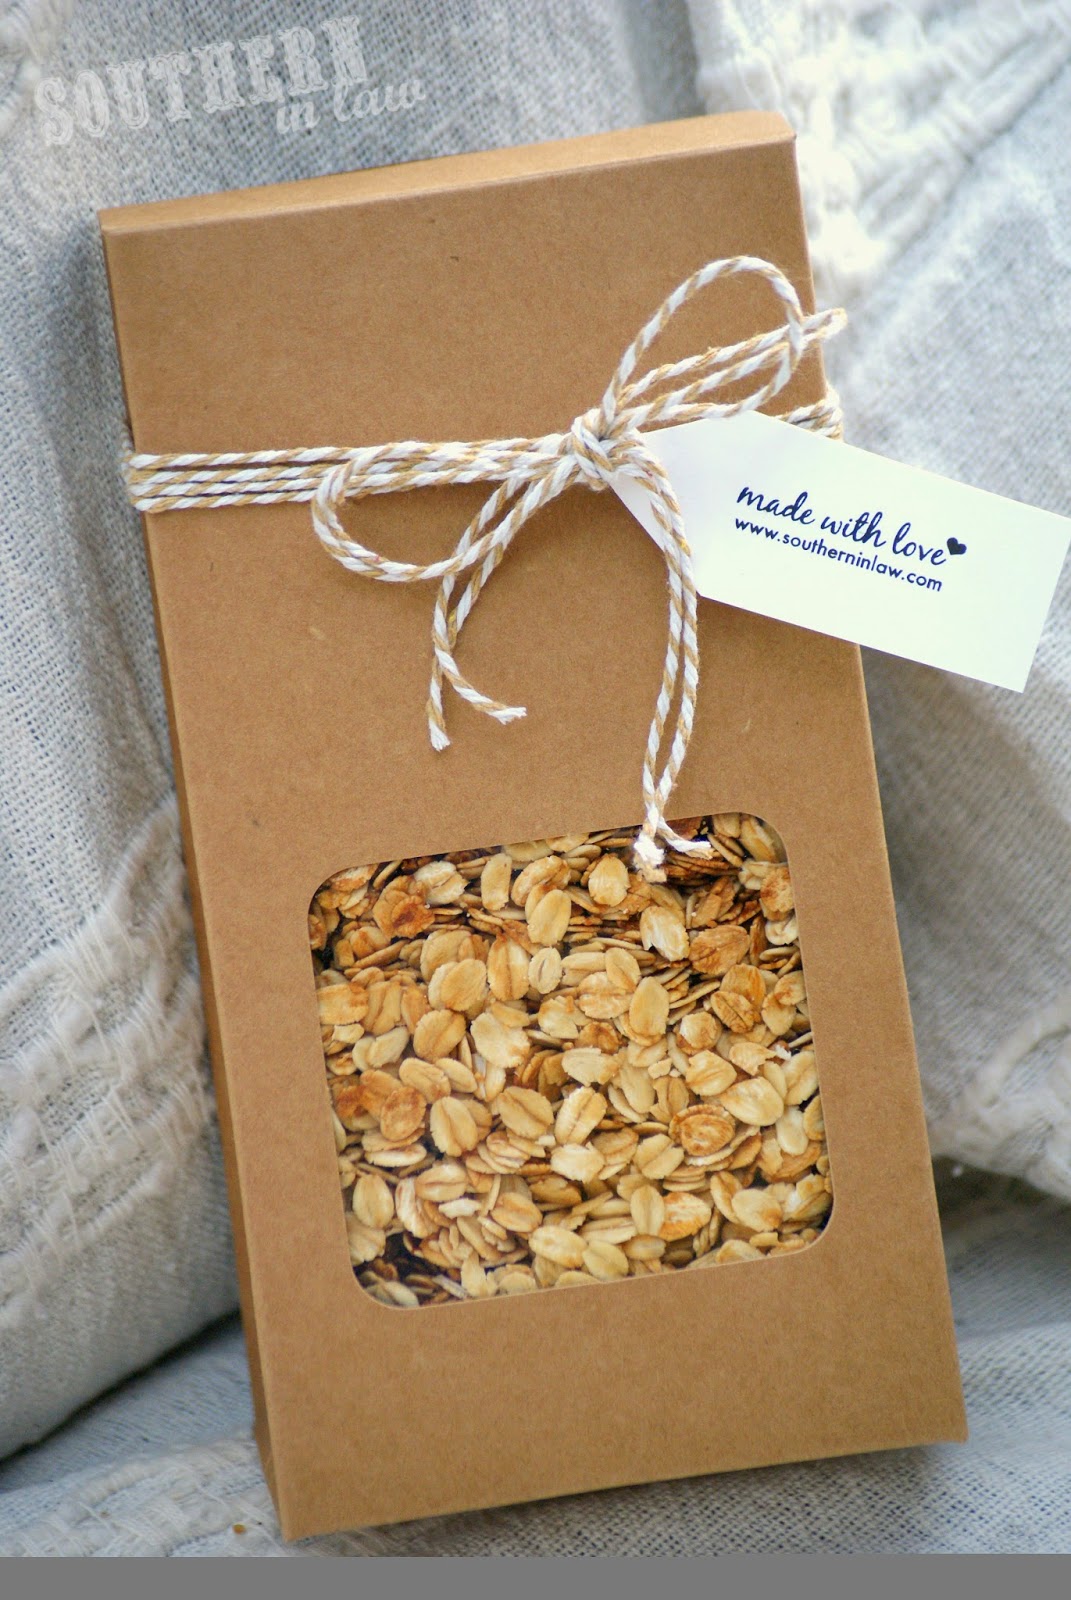 How to Package Homemade Granola for Gifting - Easy Homemade Gift Ideas How-To - Homemade Granola Gift Recipe